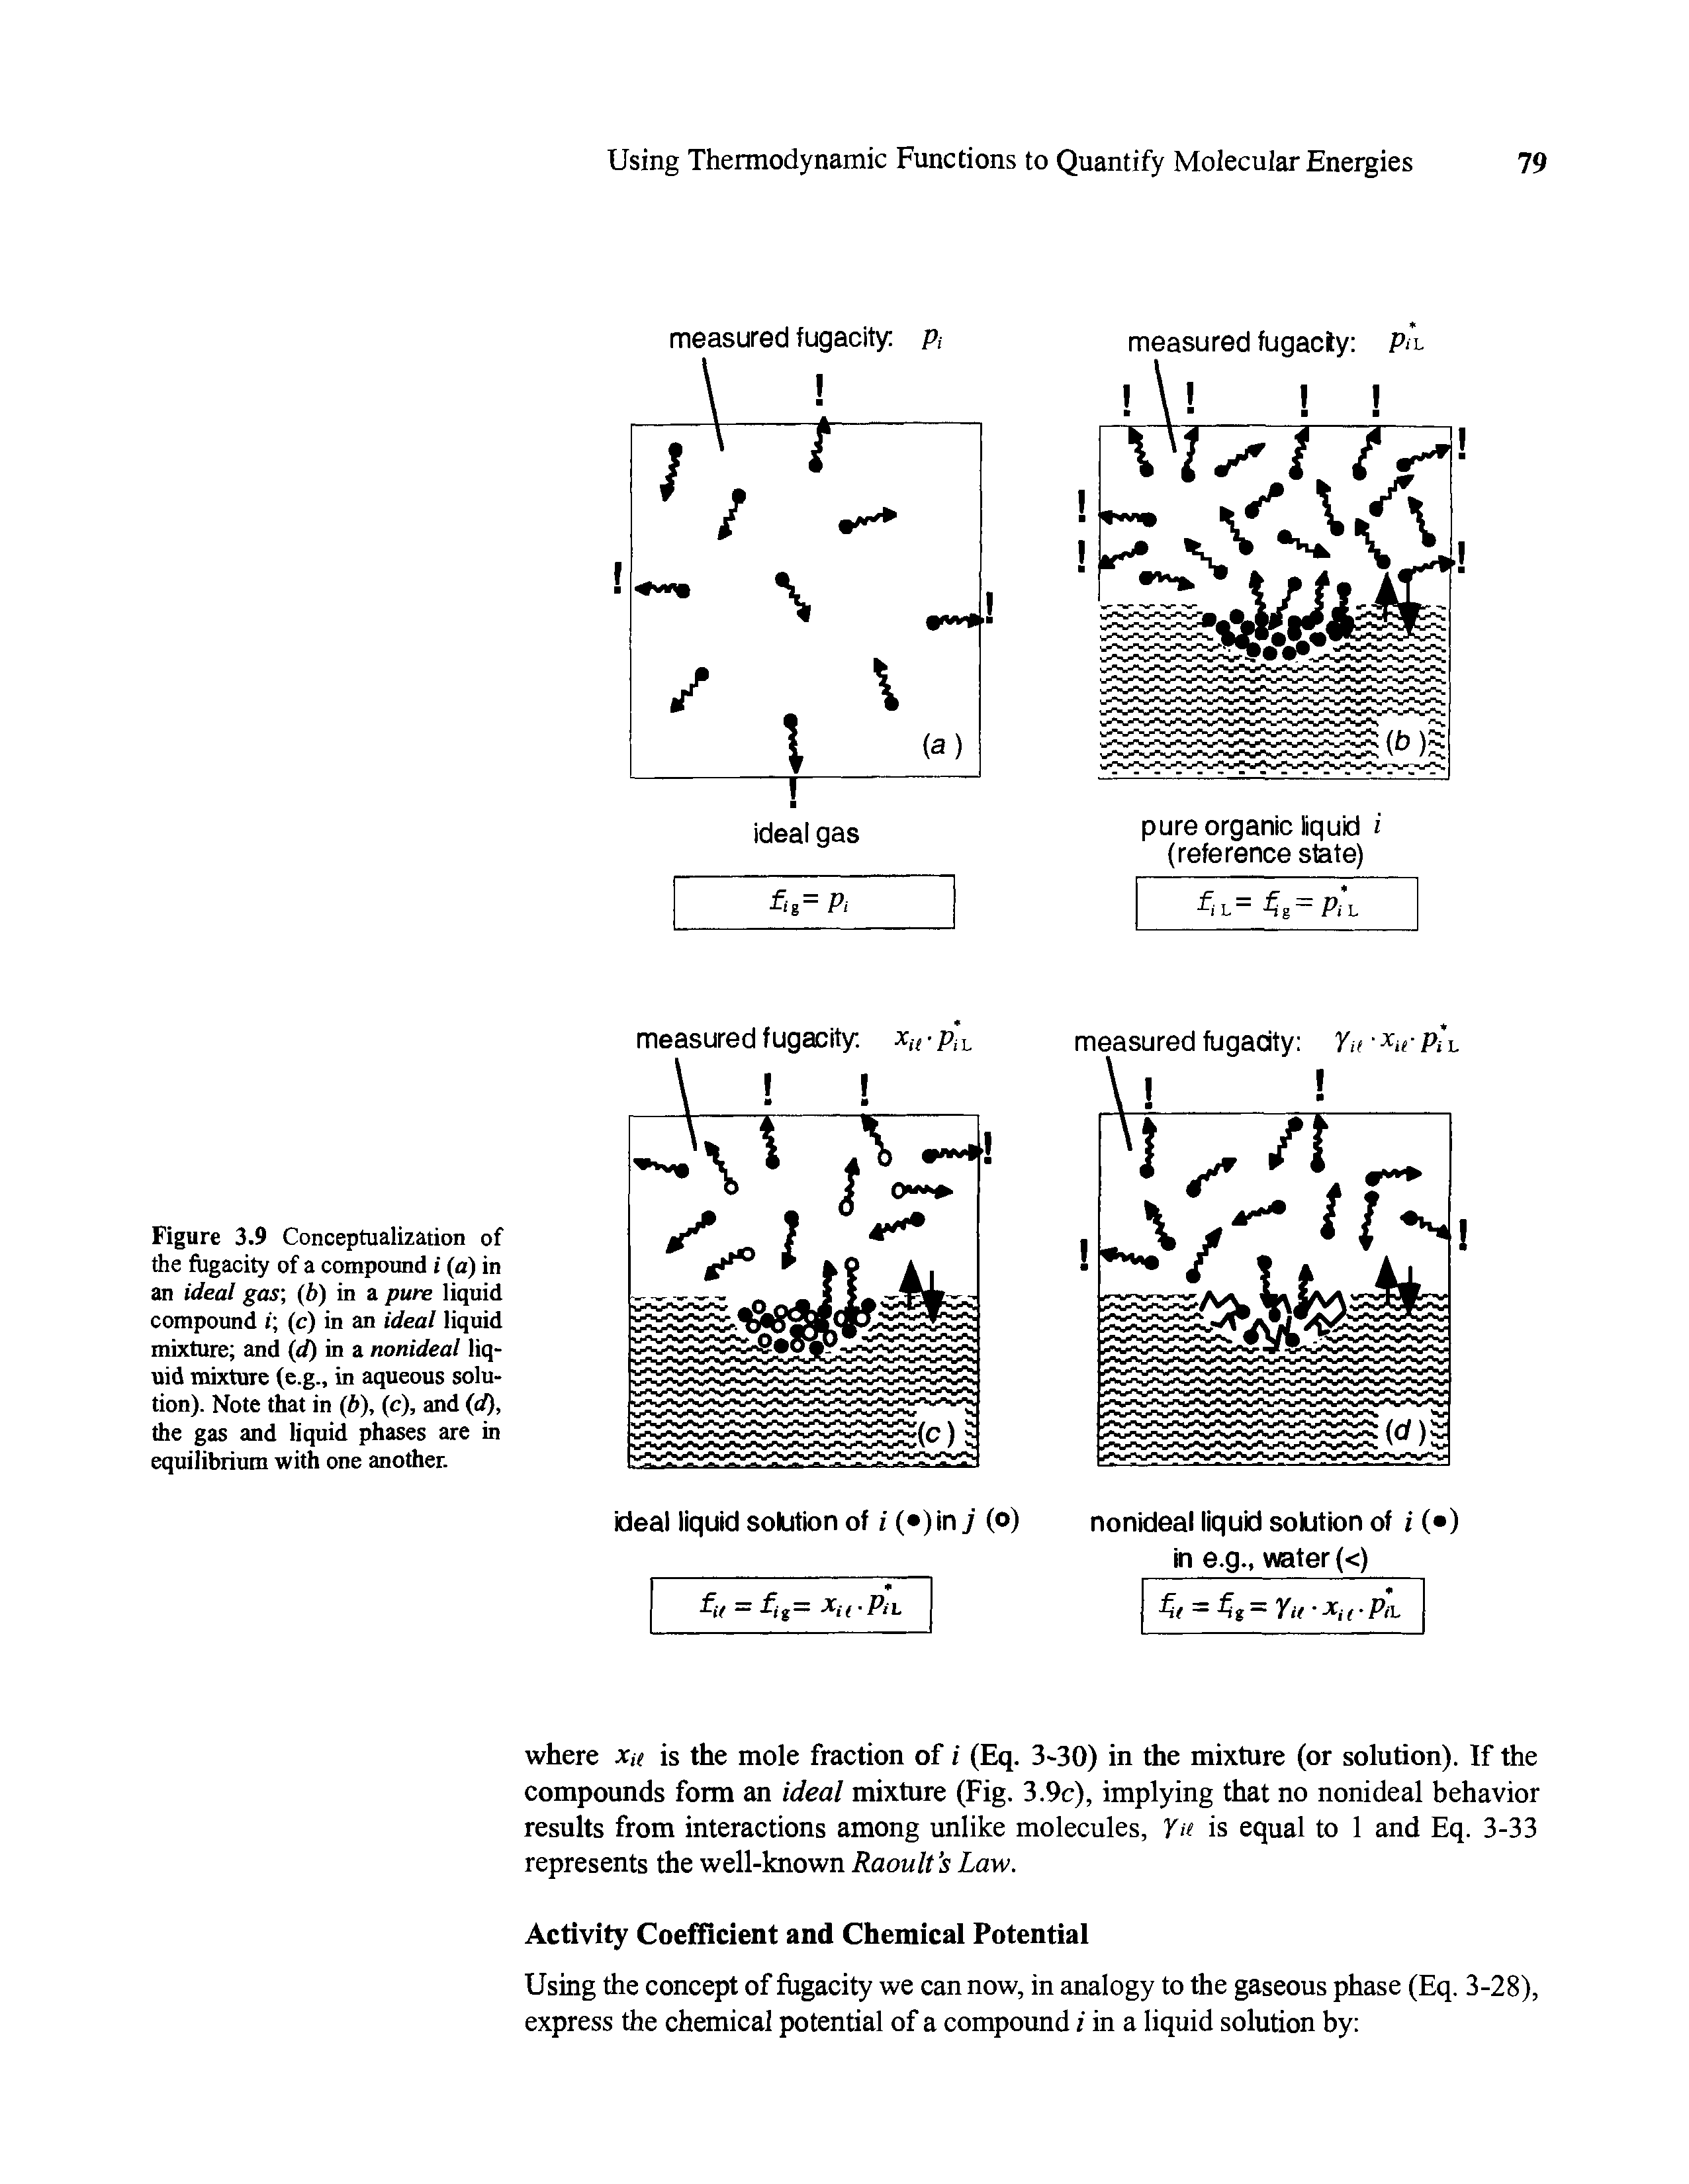 Figure 3.9 Conceptualization of the fugacity of a compound i (a) in an it/ea/ gas (h) in a pure liquid compound i (c) in an Wen/ liquid mixture and (d) in a nonideal liquid mixture (e.g., in aqueous solution). Note that in (b), (c), and (d), the gas and liquid phases are in equilibrium with one another.